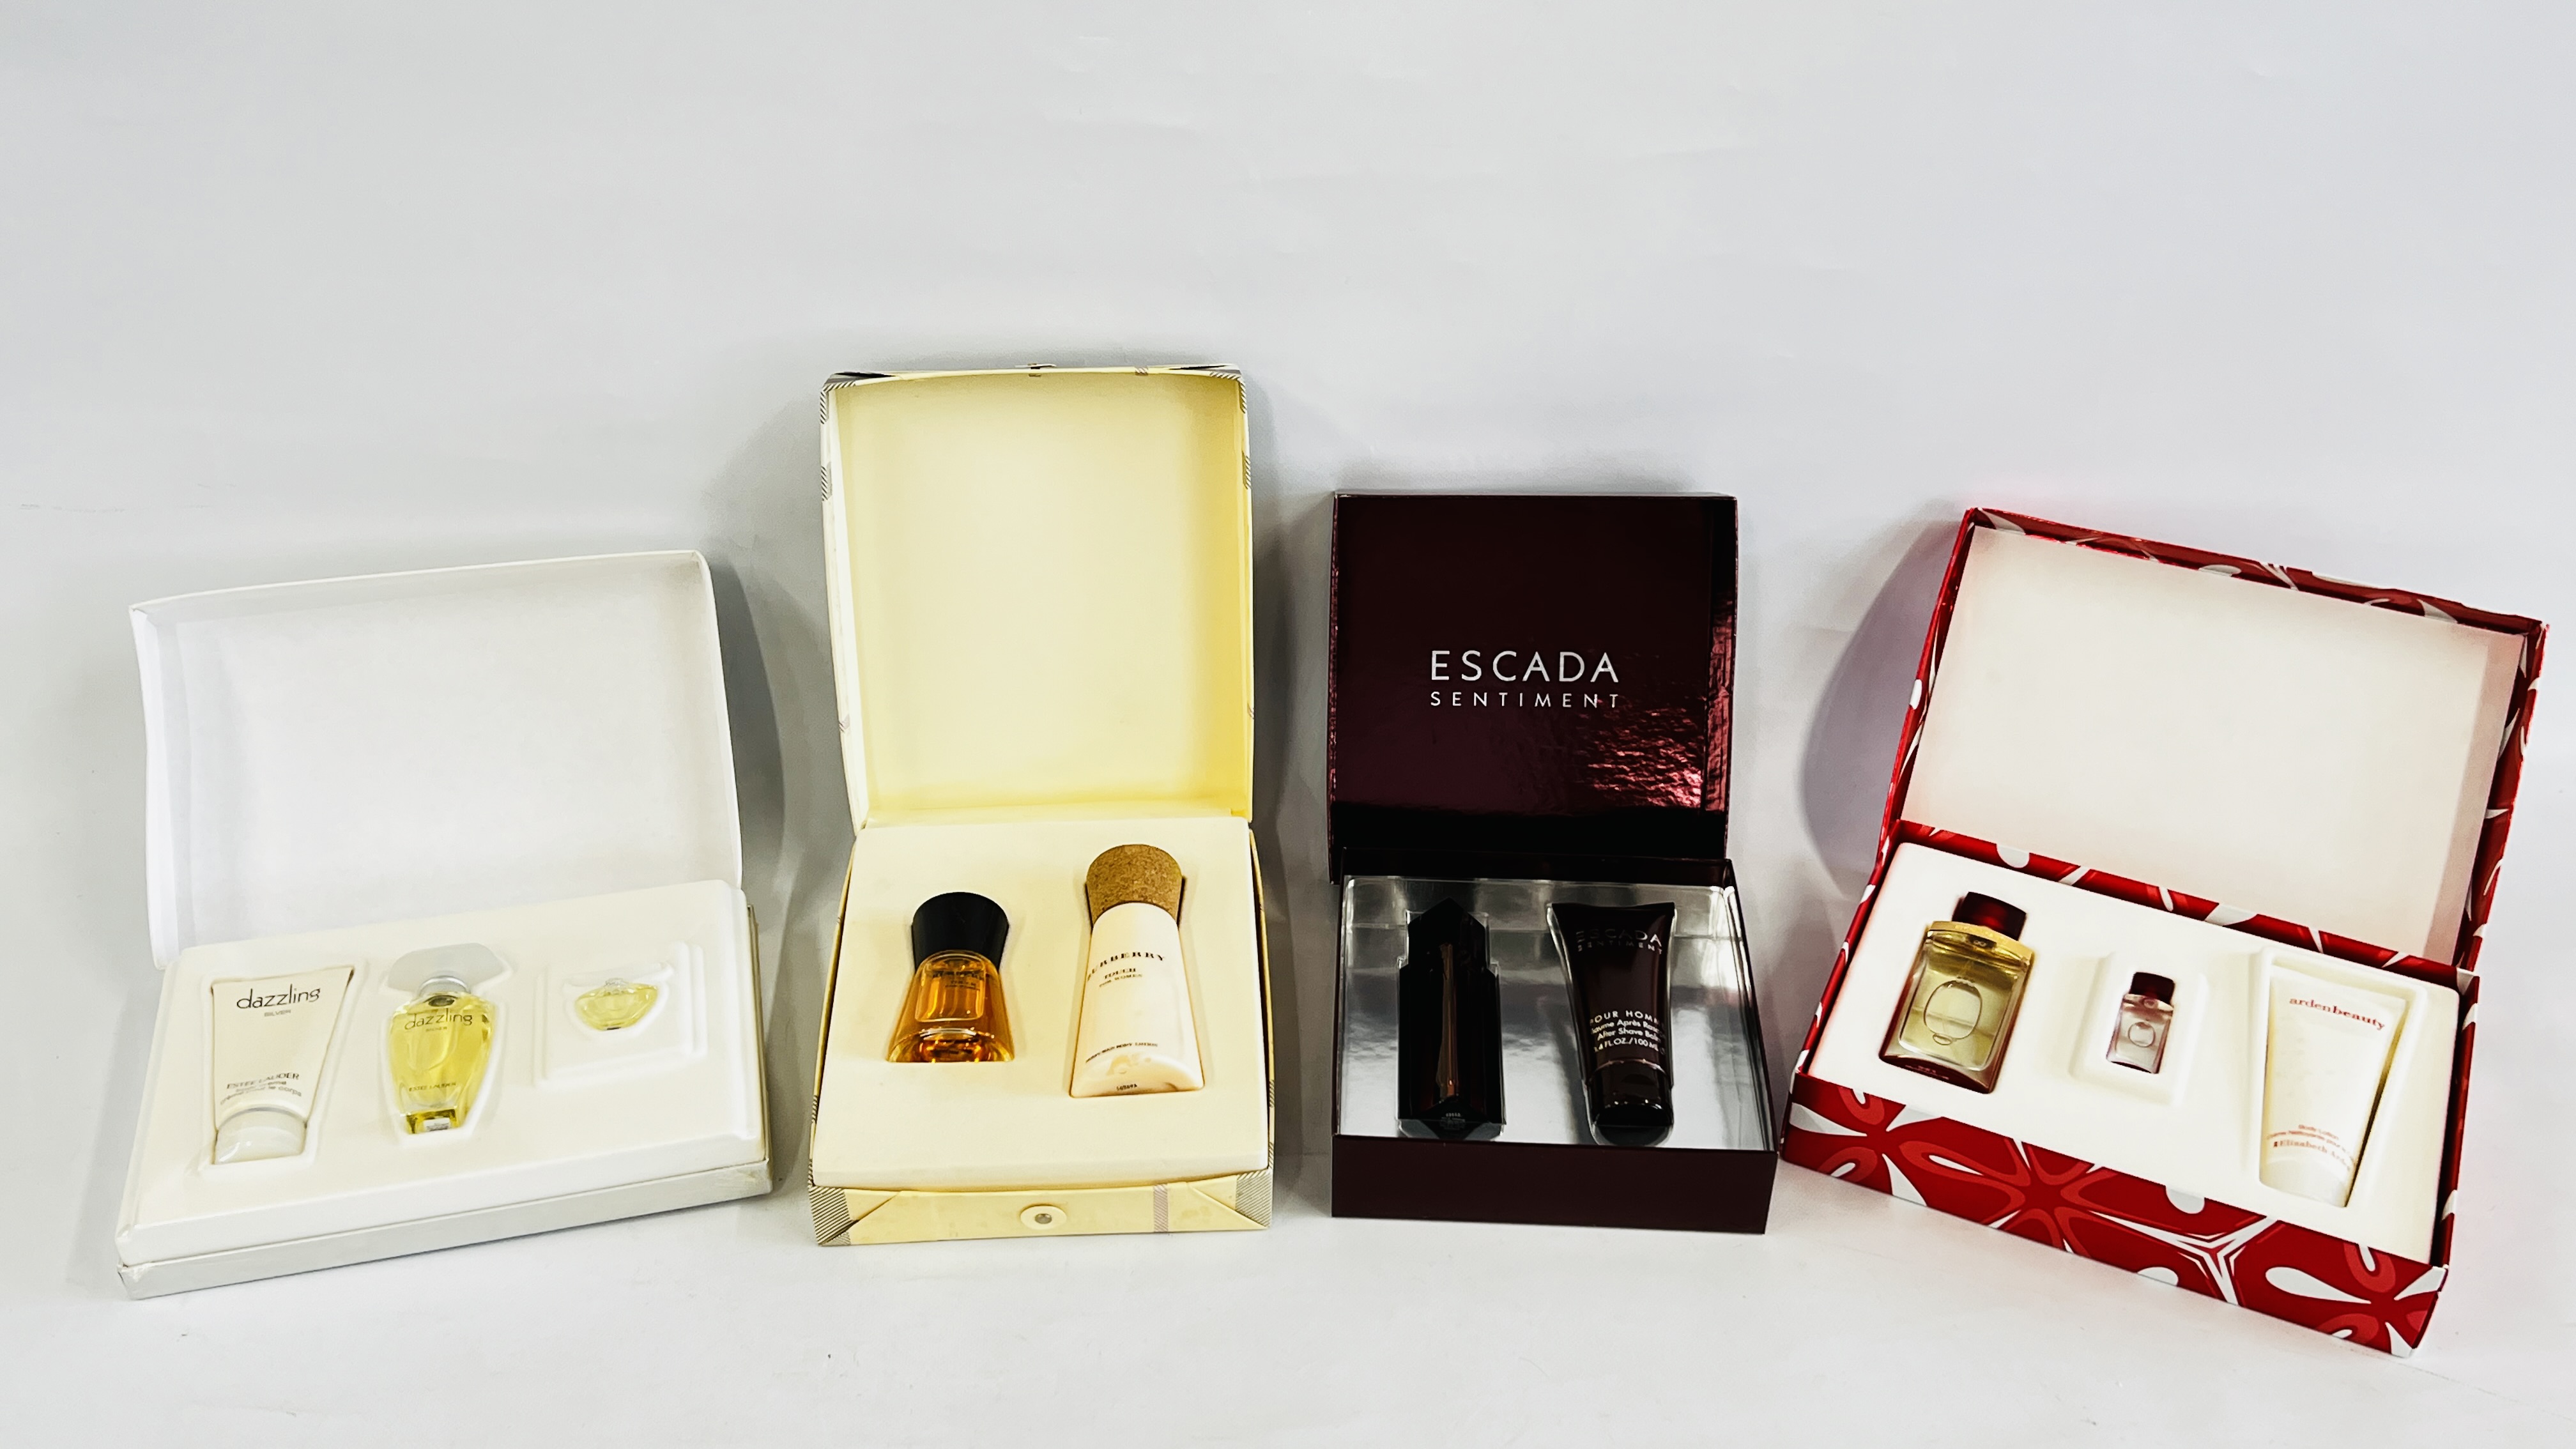 A GROUP OF 4 BOXED PERFUME GIFT SETS TO INCLUDE EXAMPLES MARKED "ESTEE LAUDER" DAZZLING SILVER,